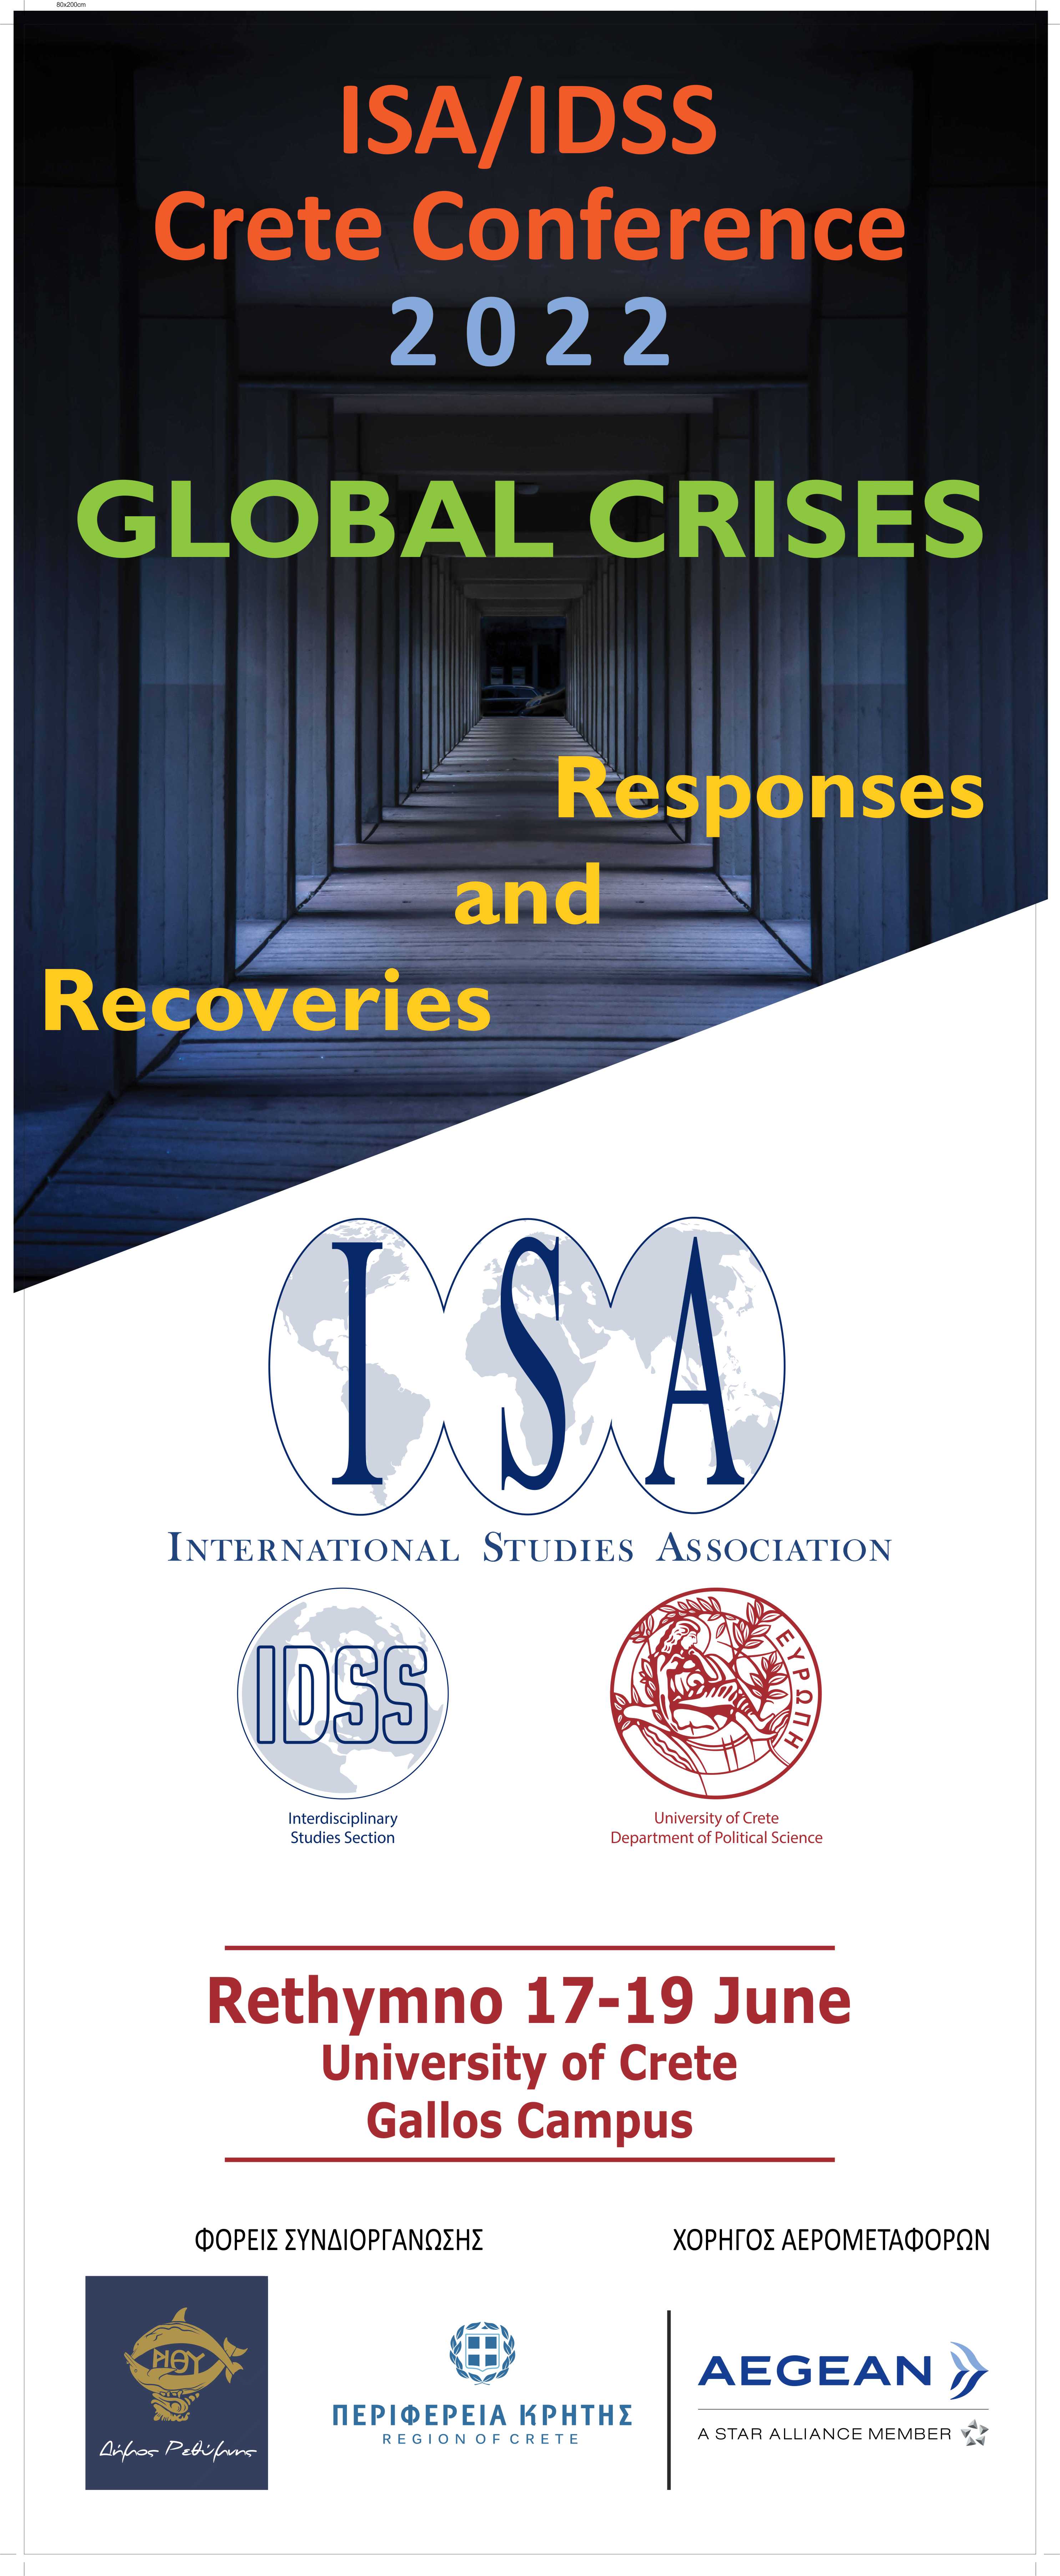 ISA-IDSS Conference 2022